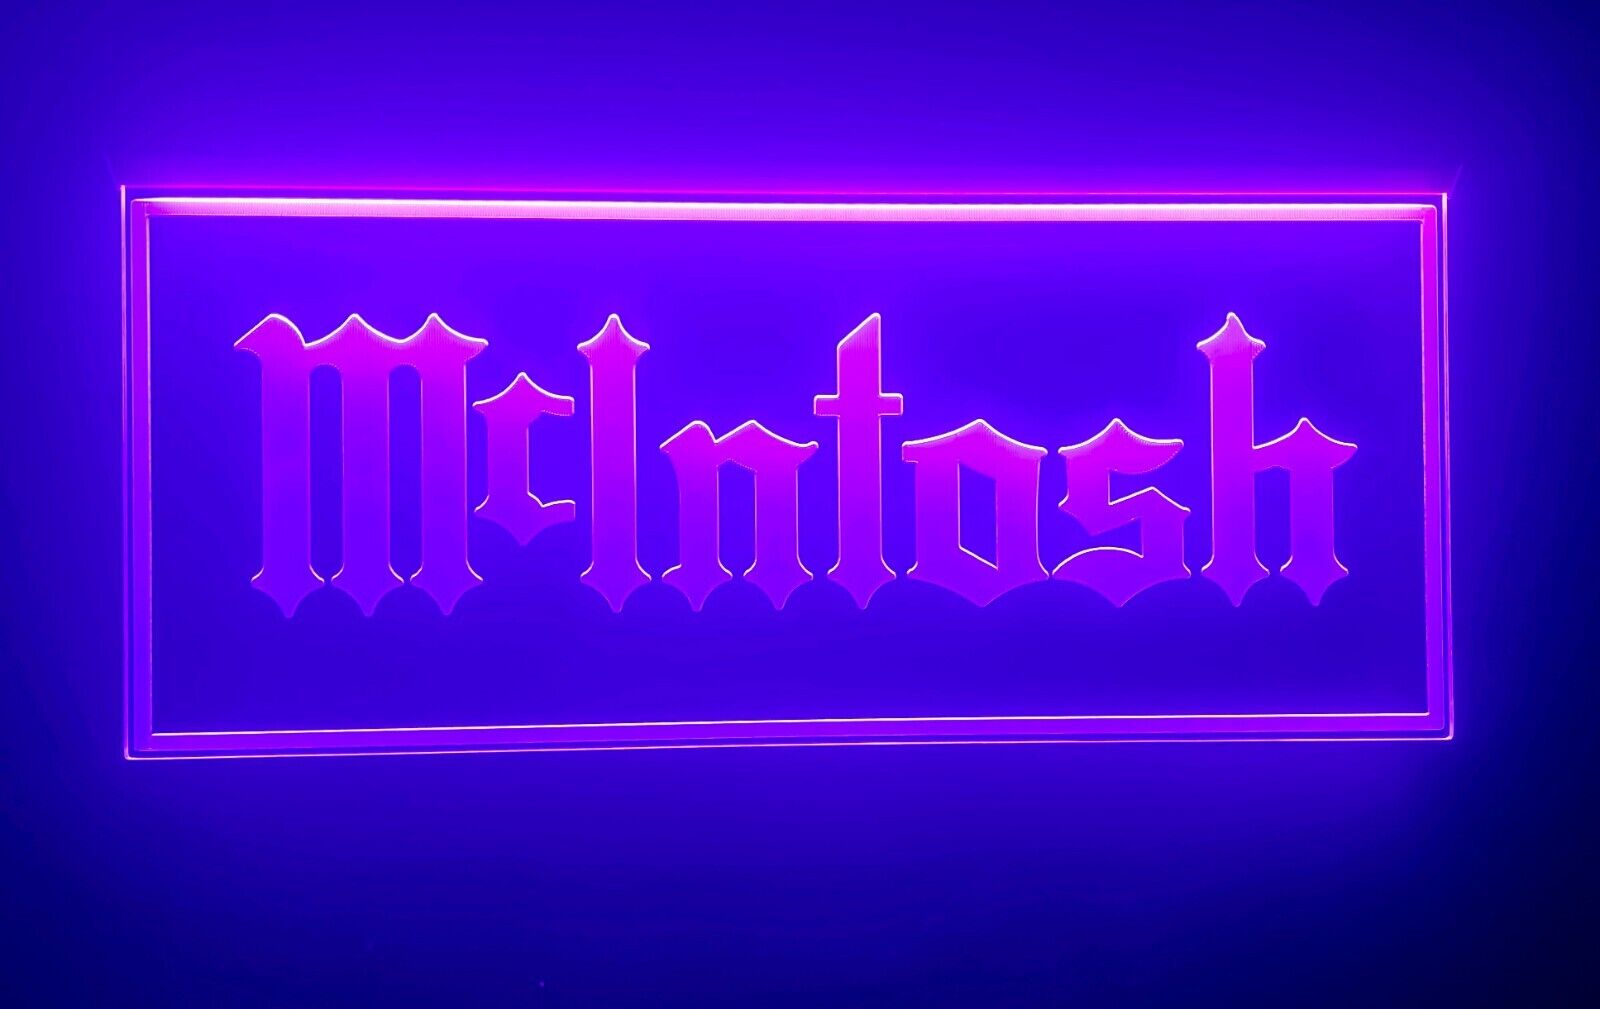 MCINTOSH LED Signs Logo Home Audio Sound Speaker Amplifiers Neon Light Sign New